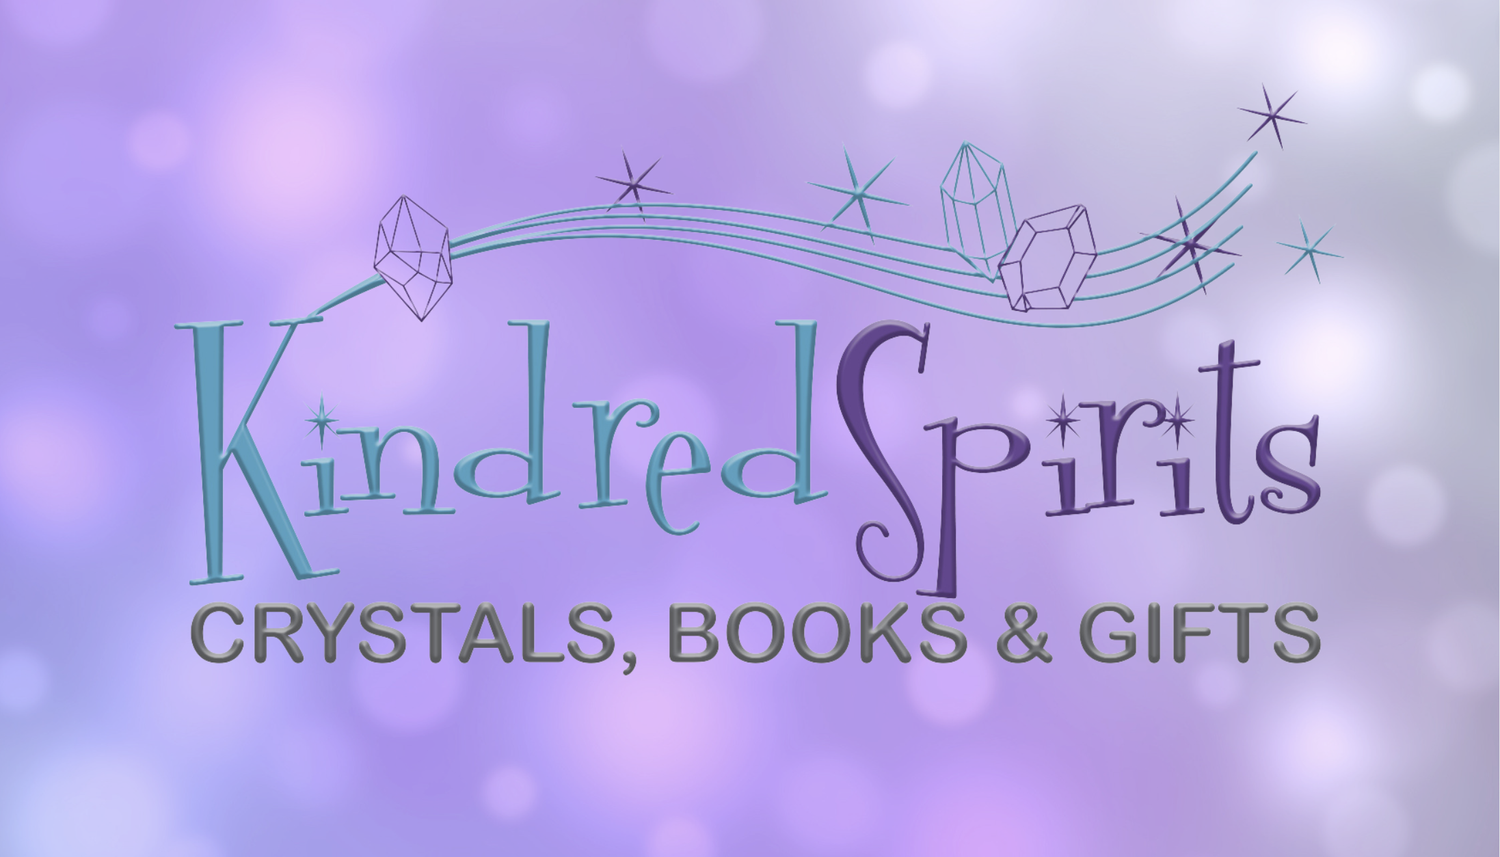 Kindred Spirits Crystals, Books & Gifts